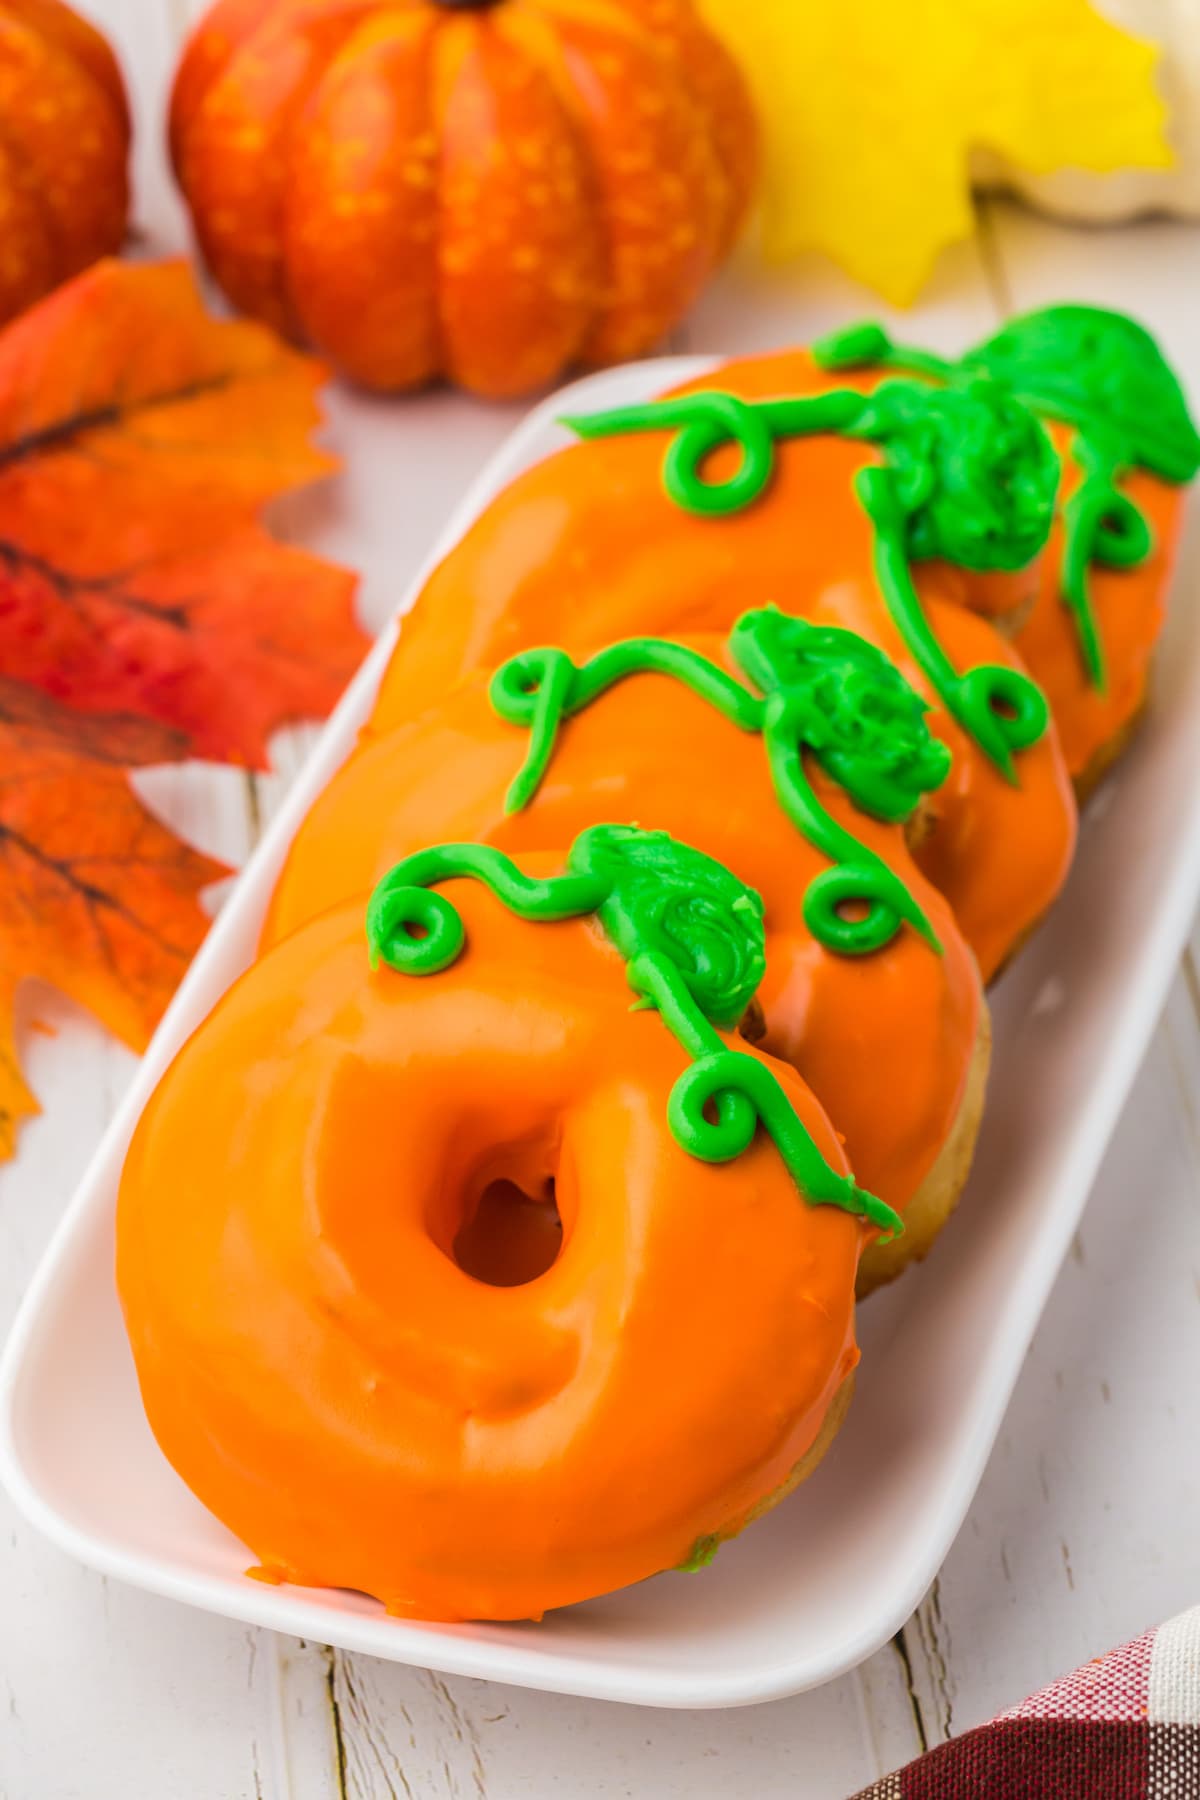 donuts glazed in orange frosting with green leaves and tendrils on top to look like a pumpkin